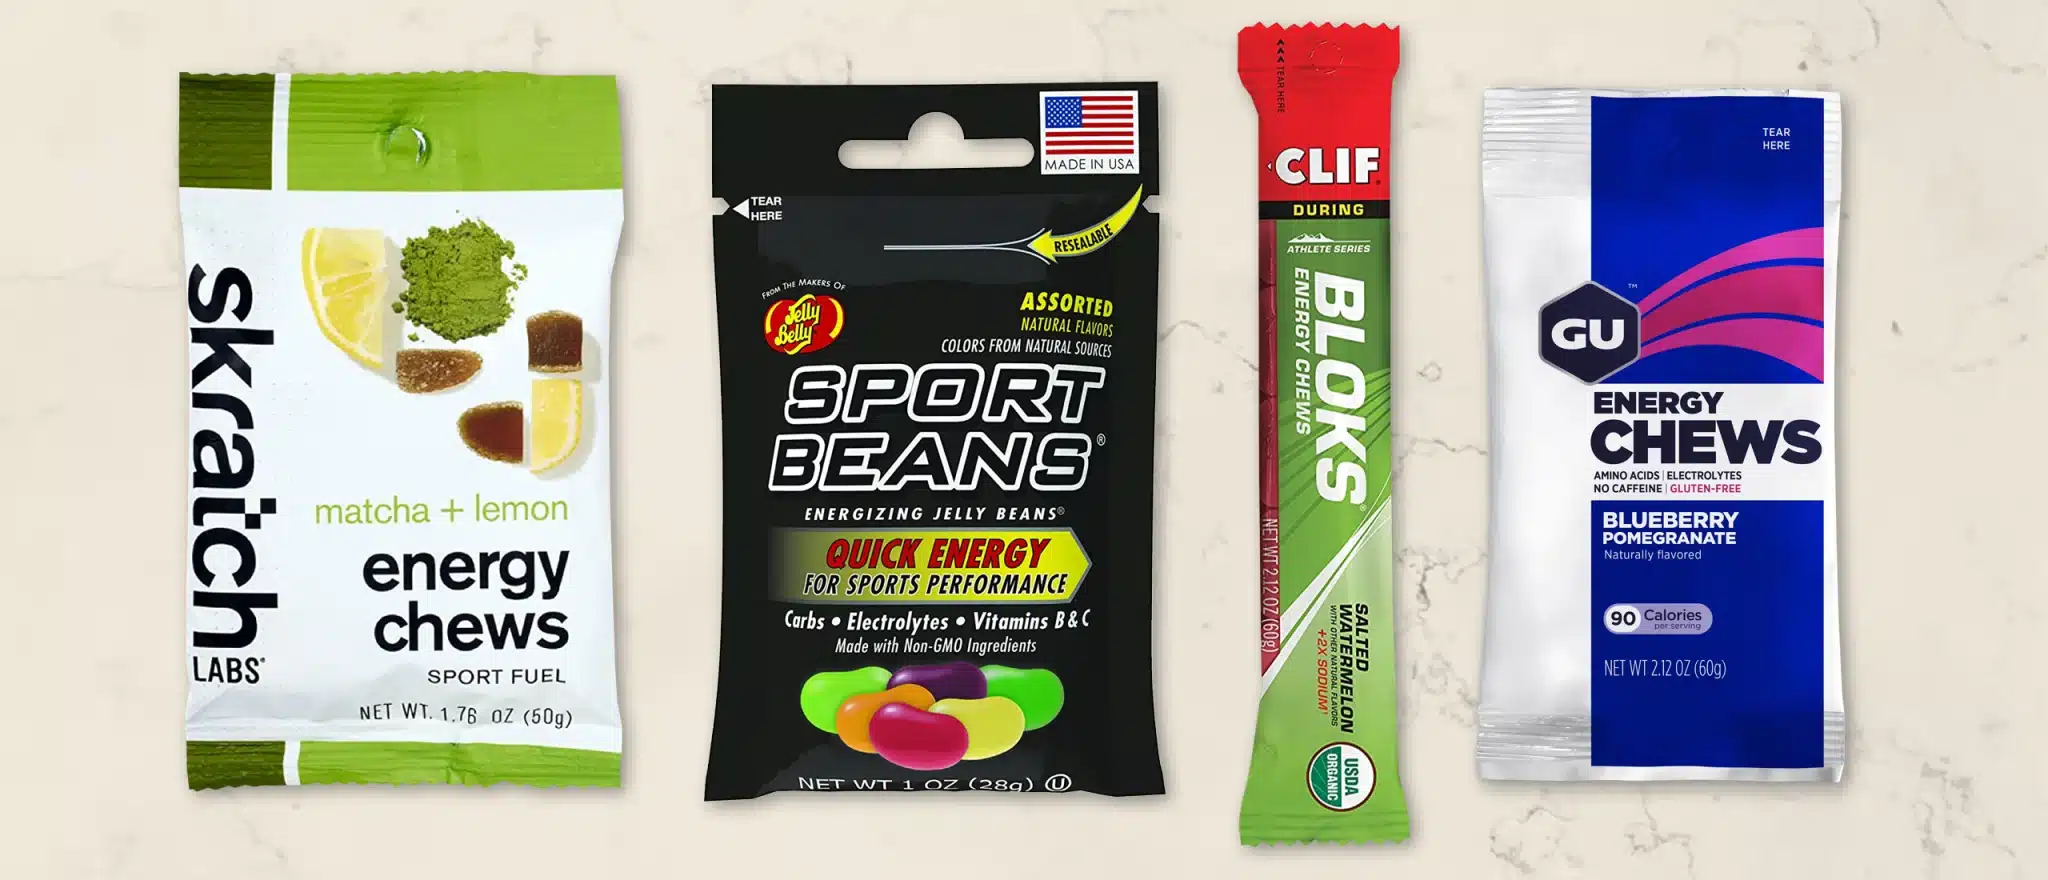 The Best Energy Chews for Chasing PRs